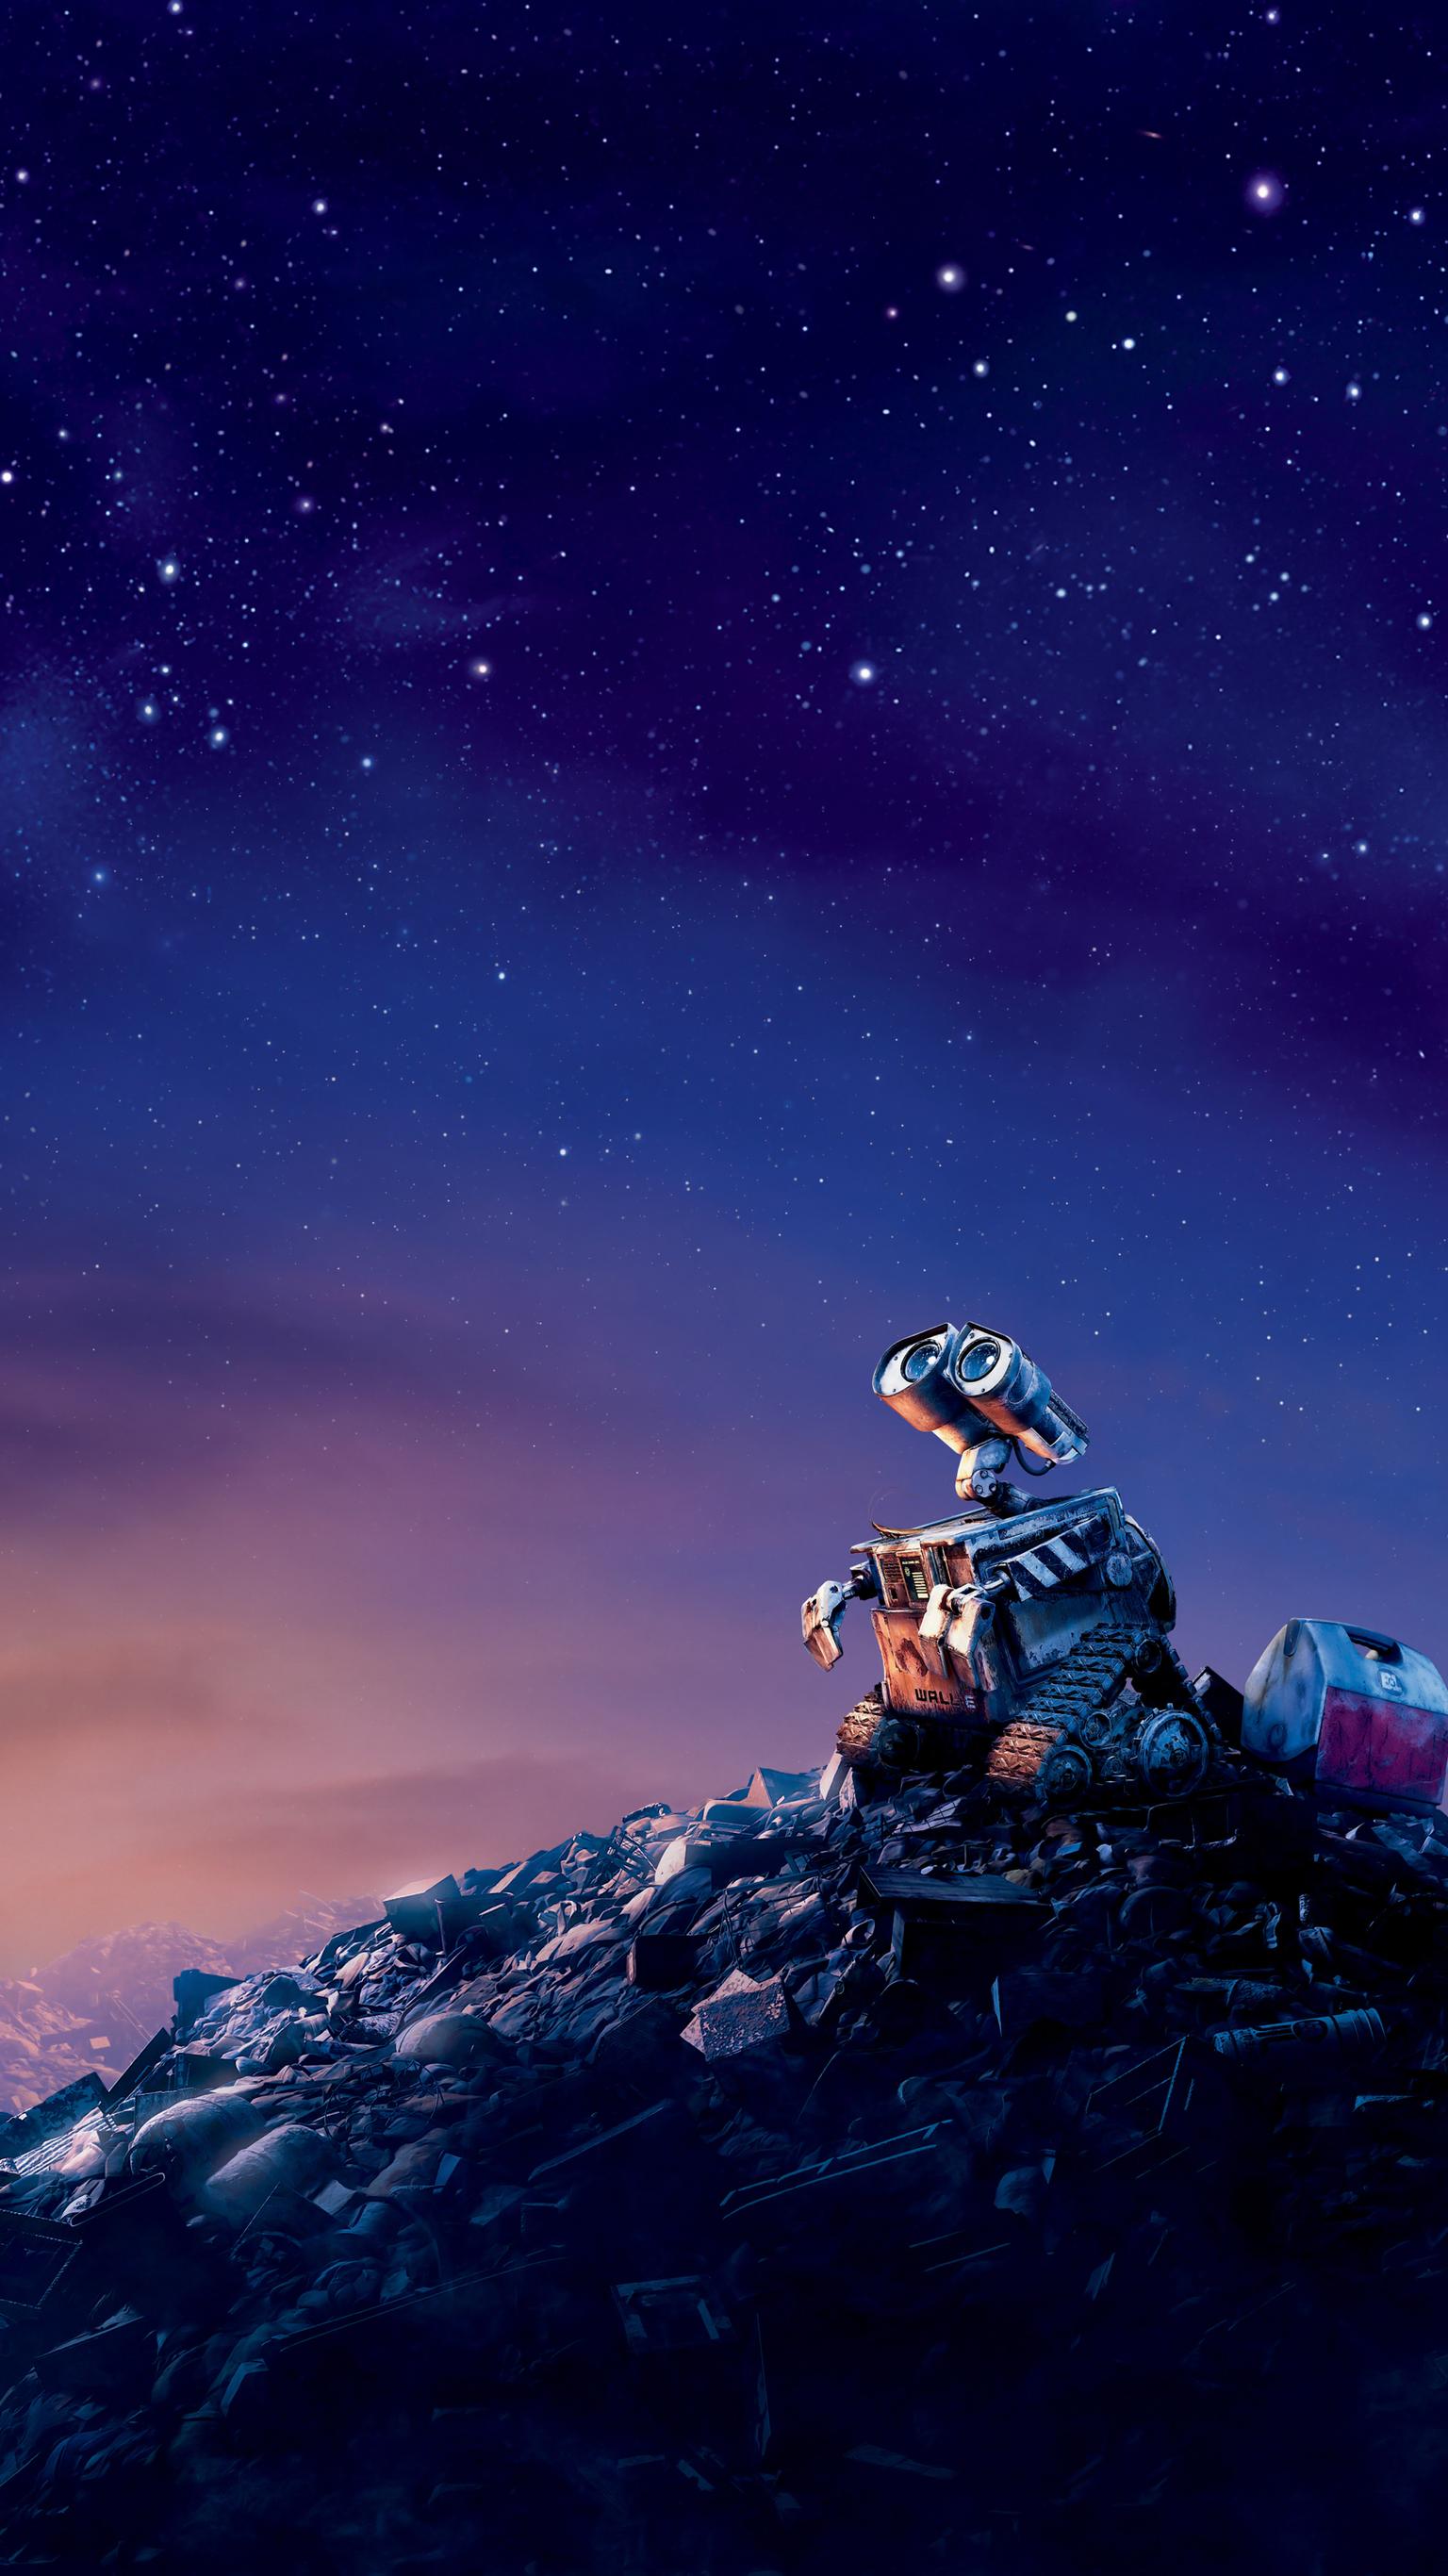 Wall E Iphone Wallpapers